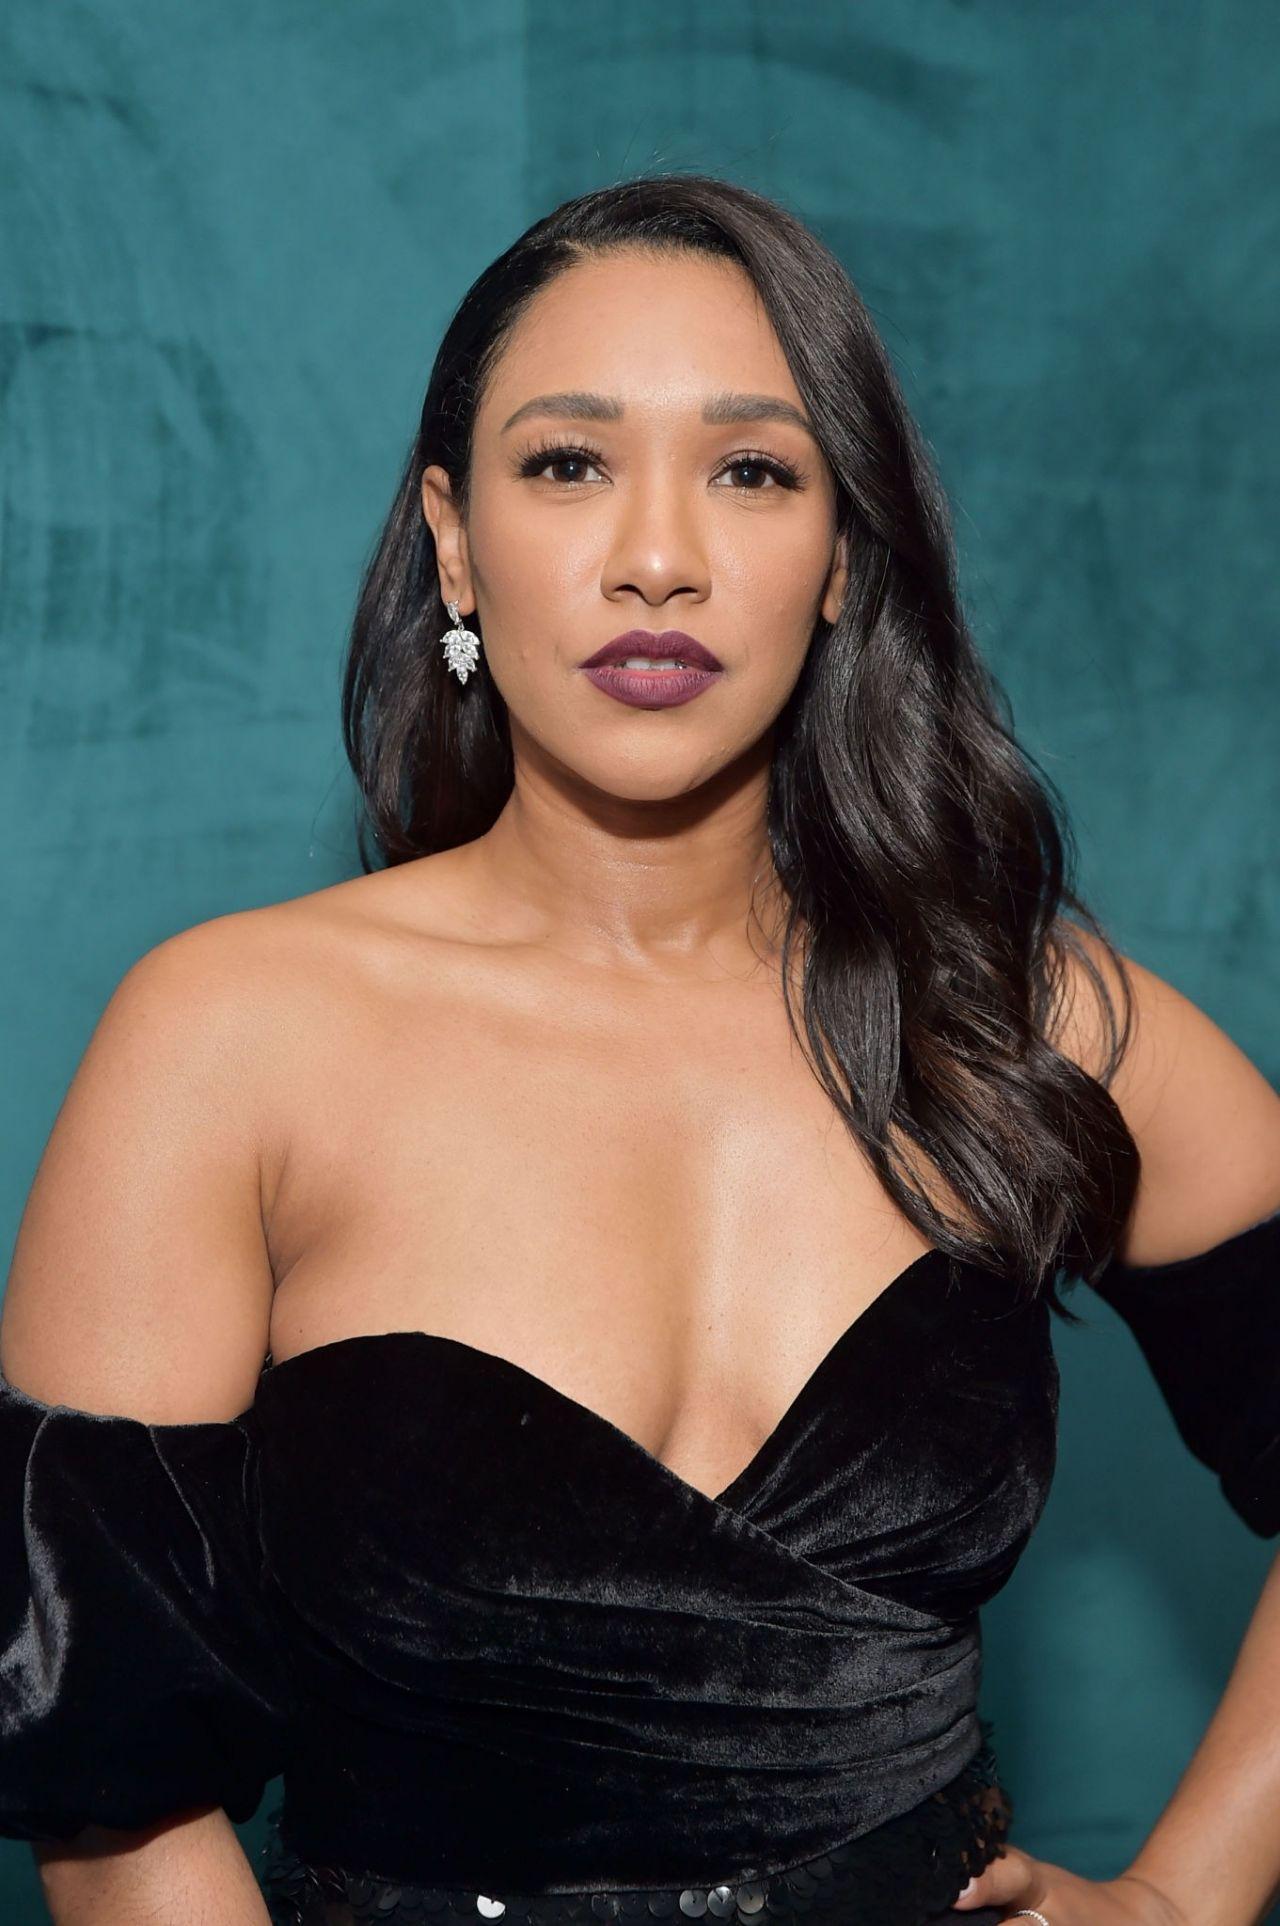 70+ Hot Pictures Of Candice Patton Who Plays Iris West In Flash TV Series 63